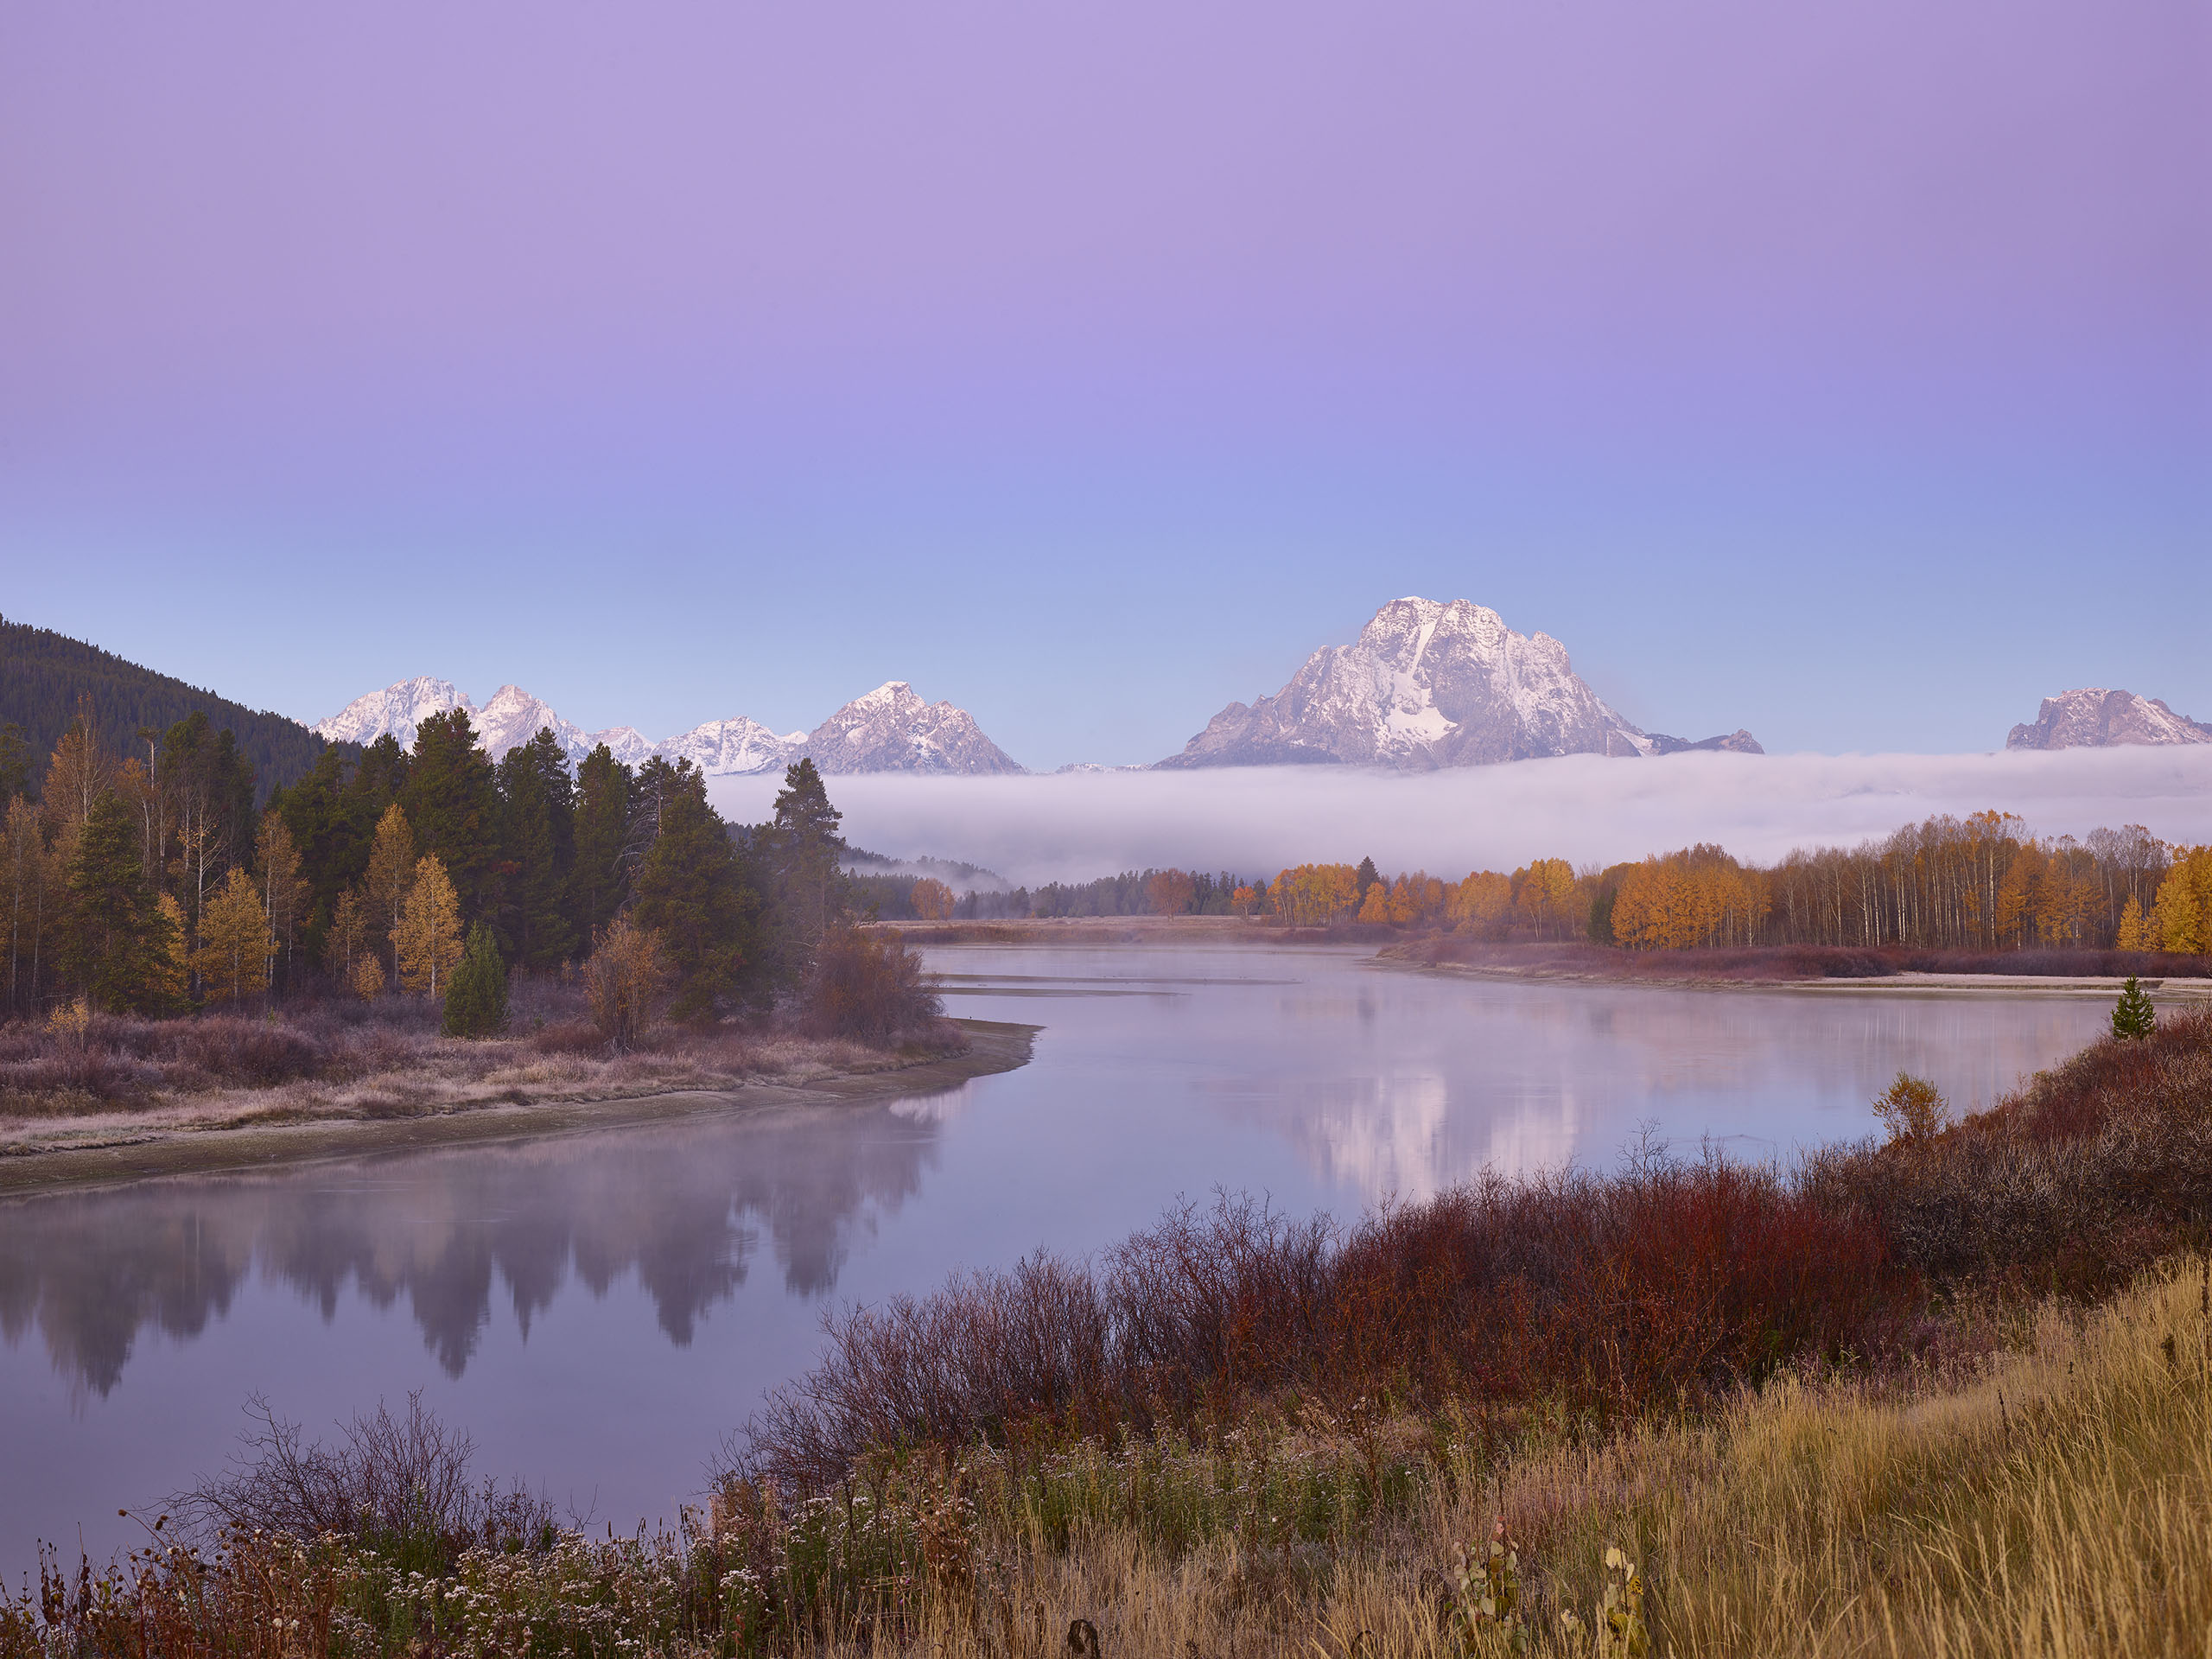 A fall morning before the sun hits the peaks at the Oxbow Bend Tetons National Park